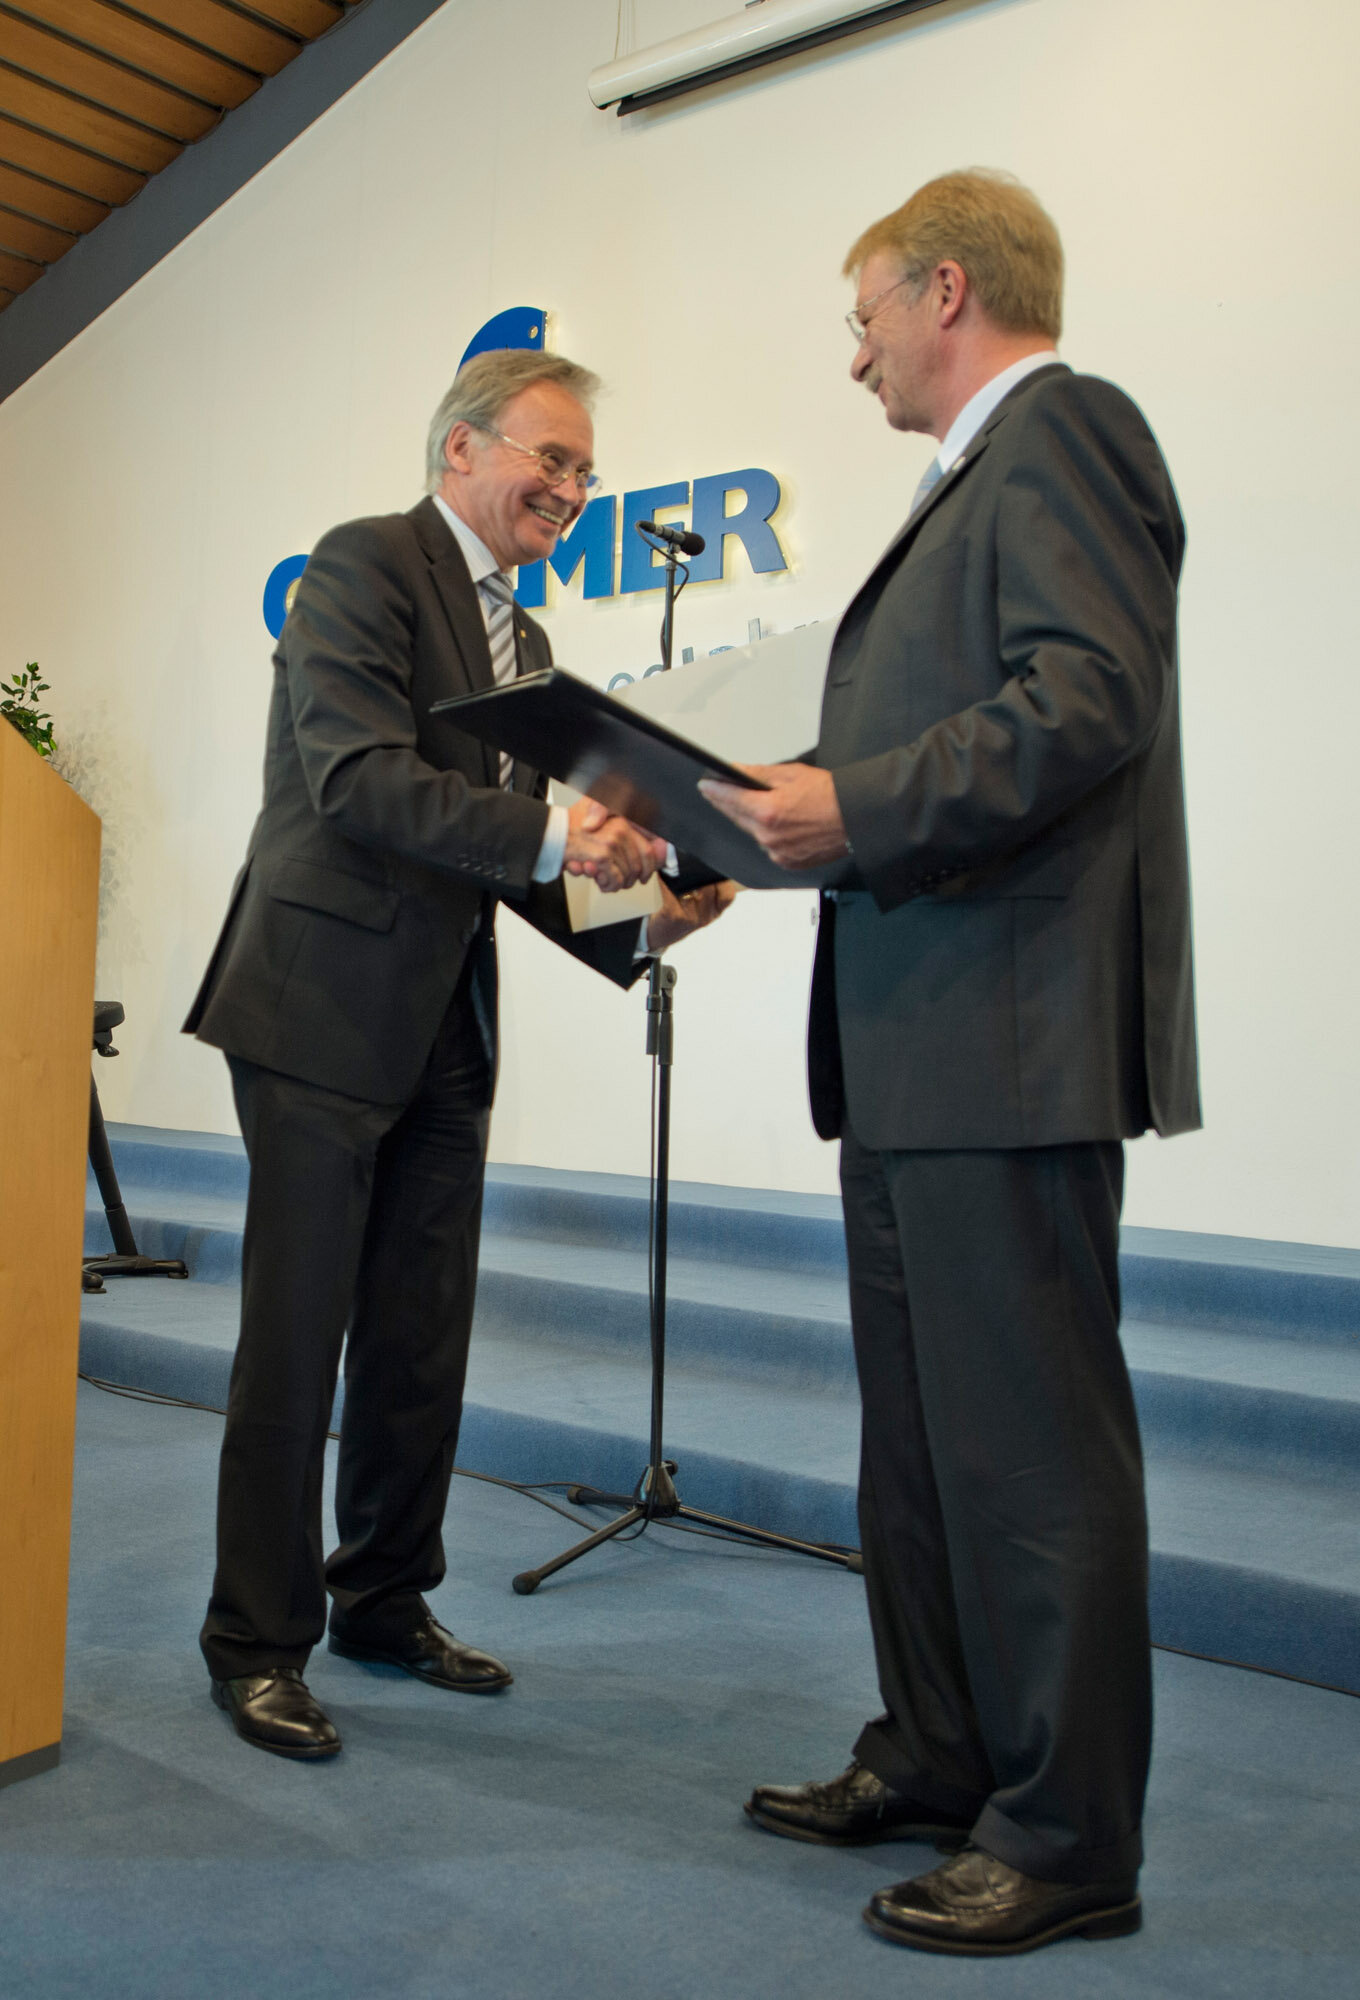 Congratulations: Mr. Ortwin Goldbeck, President of the Bielefeld Chamber of Commerce (left), presents Dr. Achim Brandenburg with the Chamber‘s Certificate of Honour.